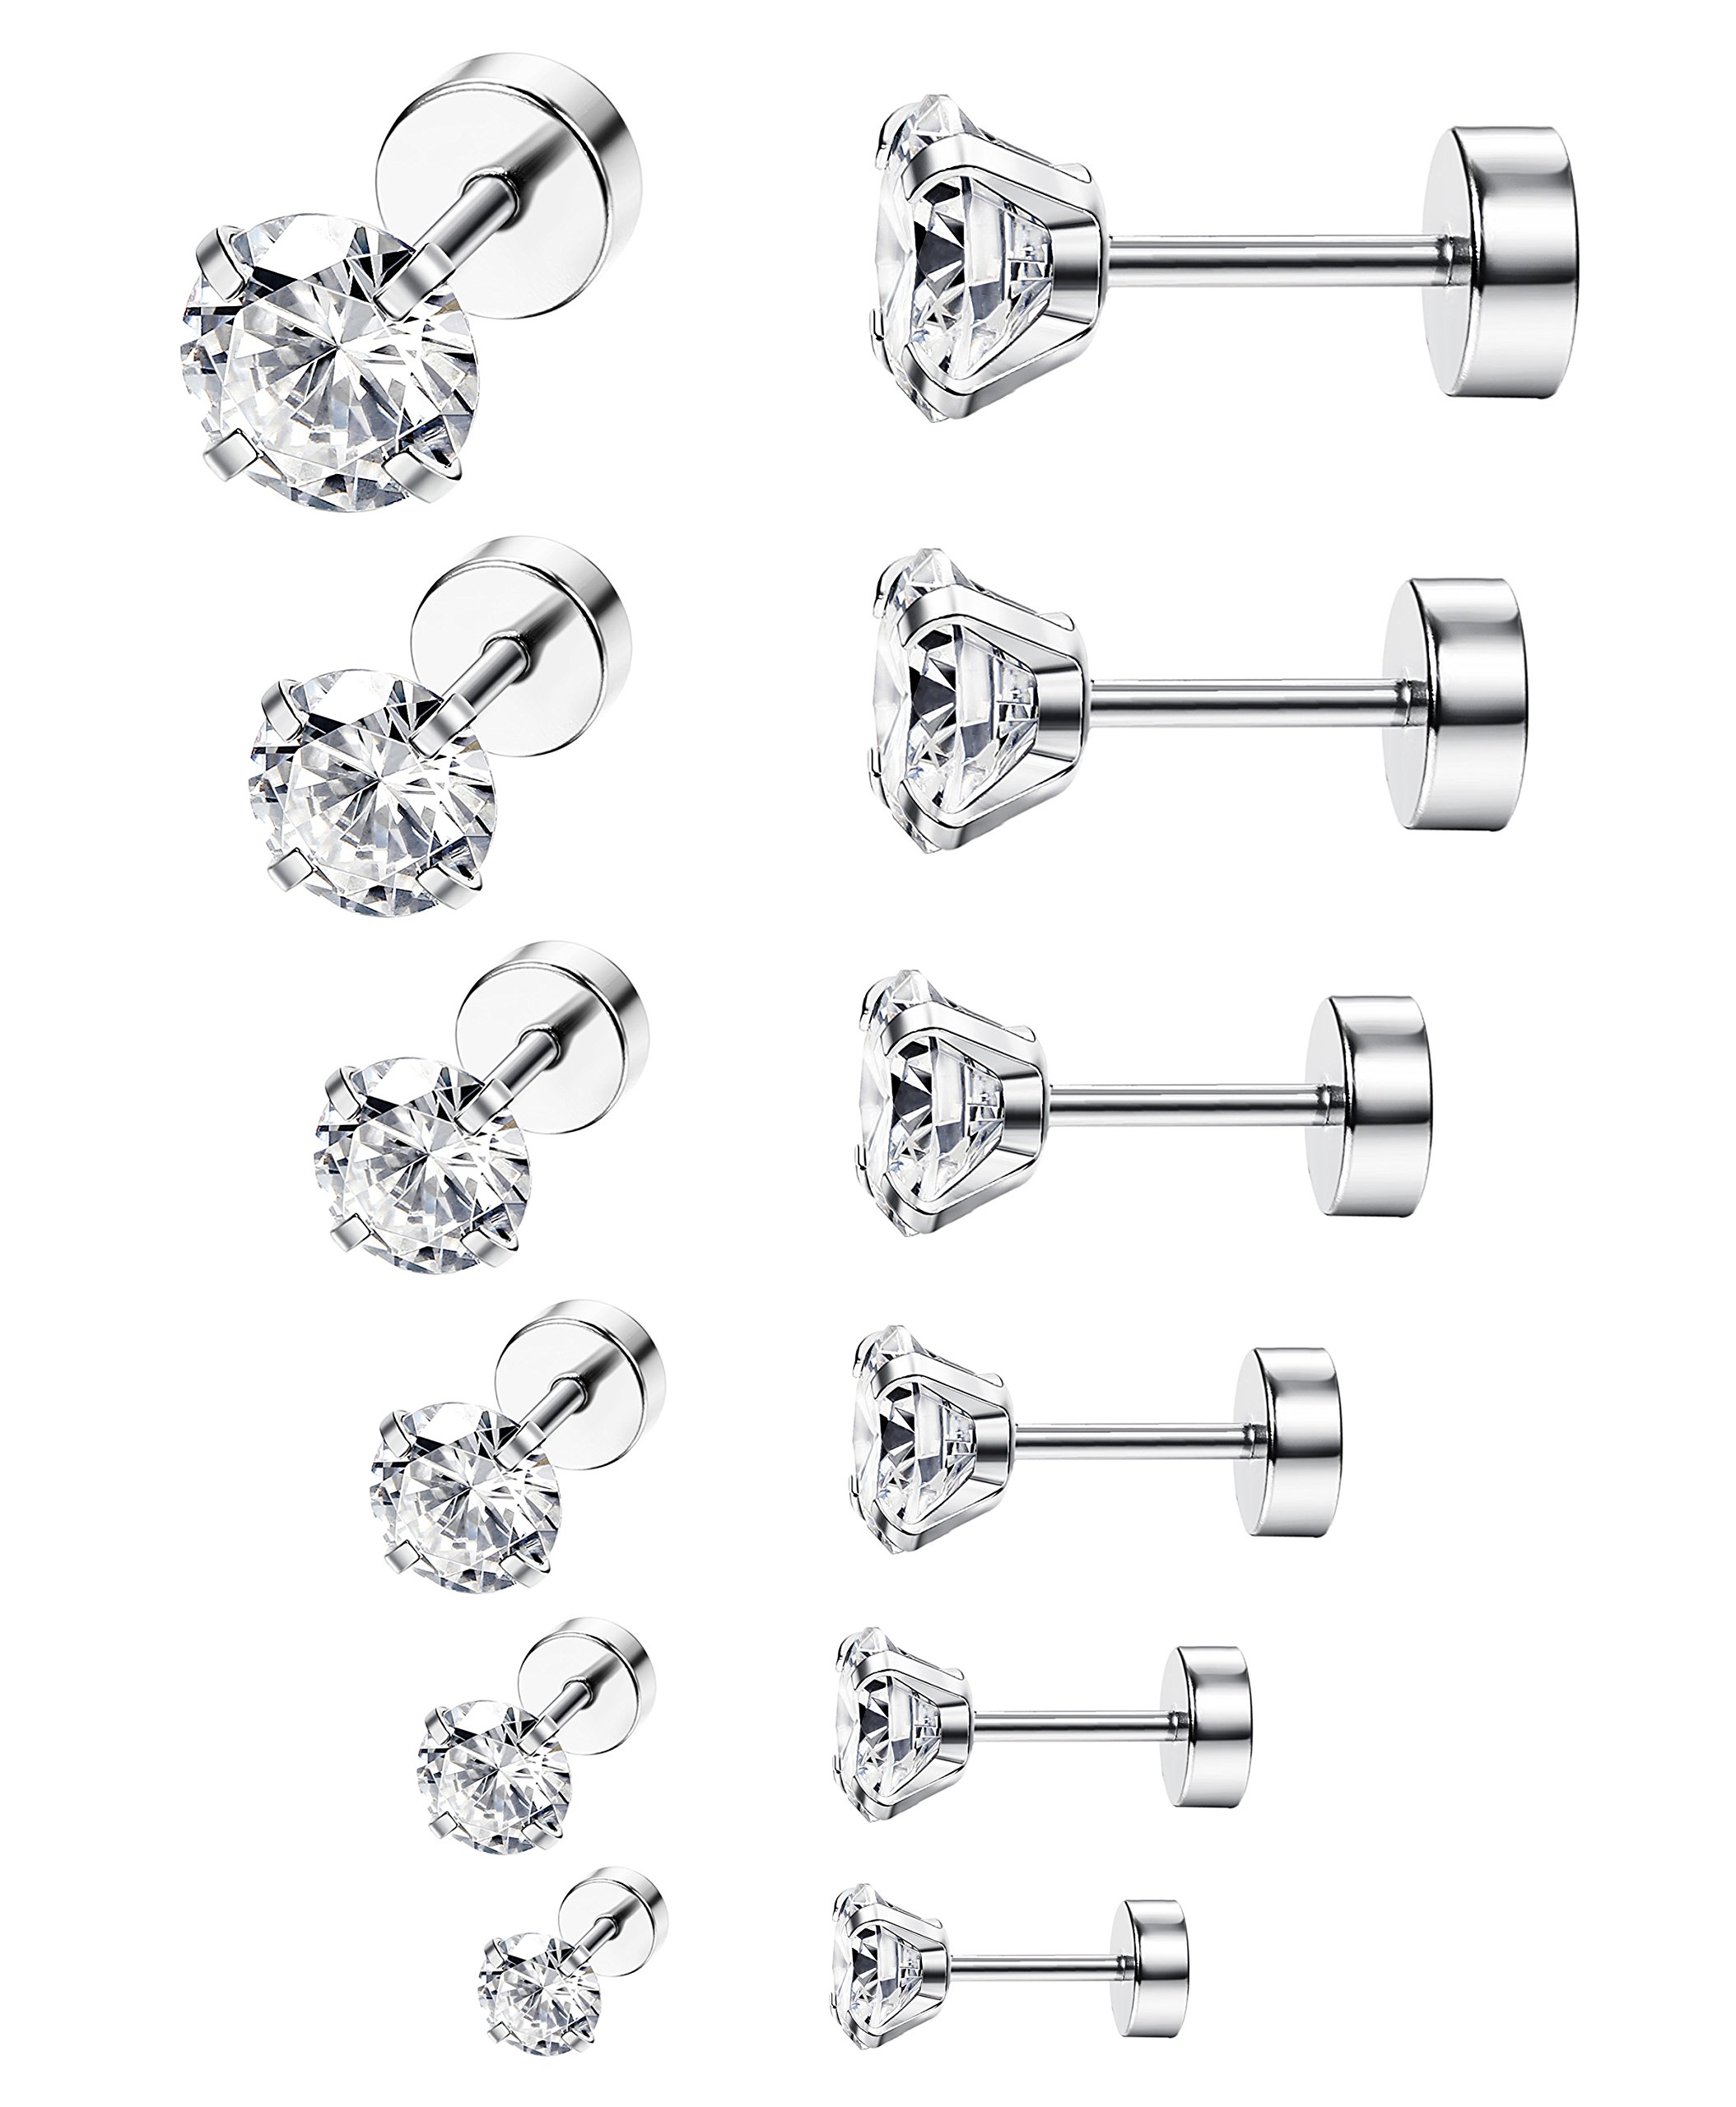 ORAZIO 6-8 Pairs 18G Stainless Steel Ear Stud Piercing Barbell Studs Earrings Round Cubic Zirconia Inlaid Cartilage Earring